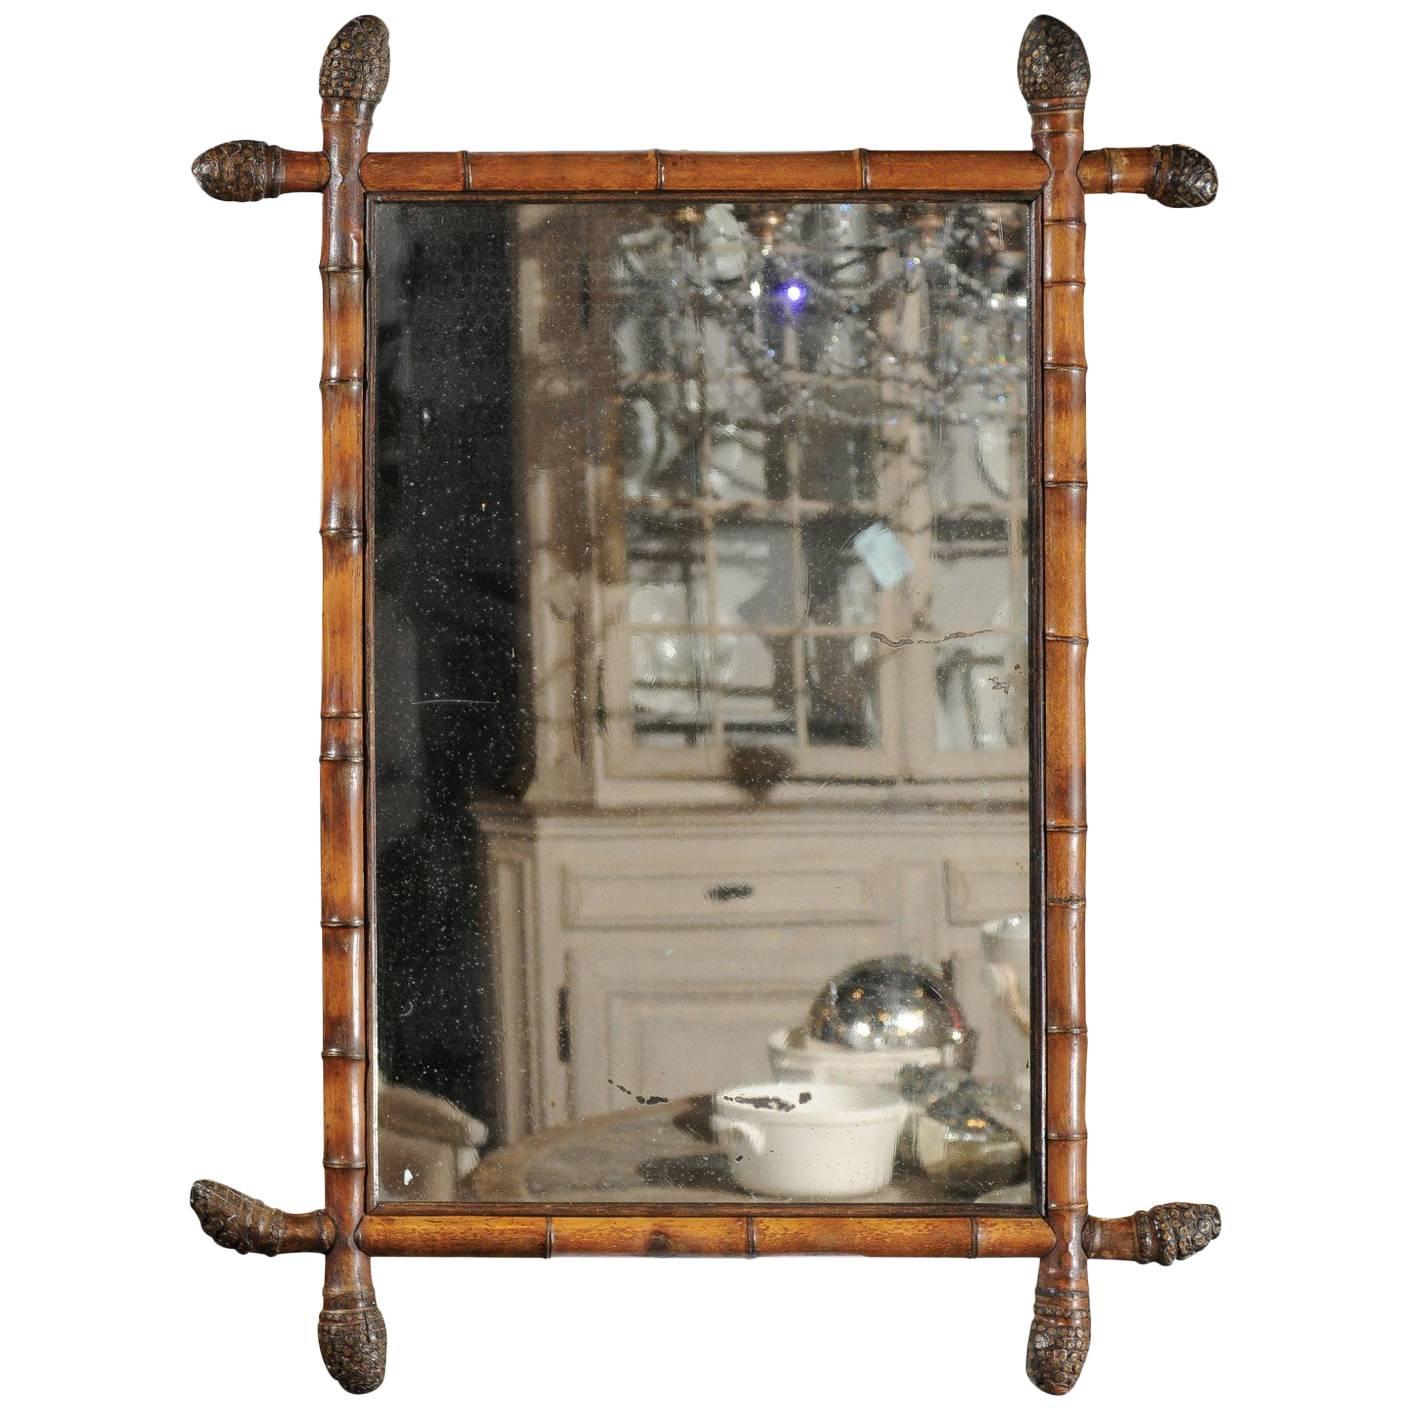 French Unusual Rectangular Bamboo Mirror with Bamboo Root Finials, circa 1880